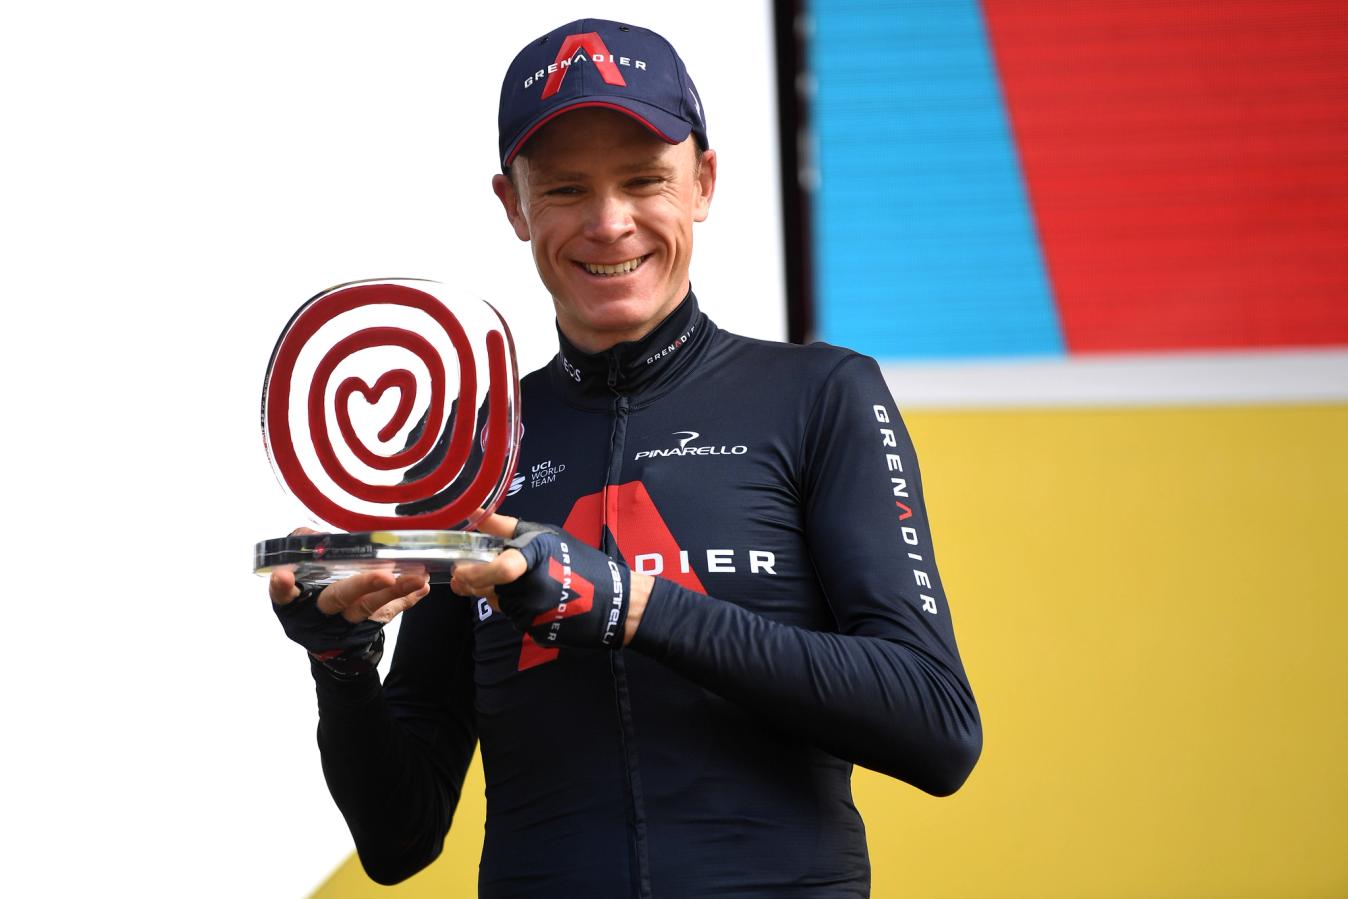 Chris Froome was presented with the trophy for his 2011 Vuelta a España win some nine years later, as he made his Grand Tour return following a life-threatening crash